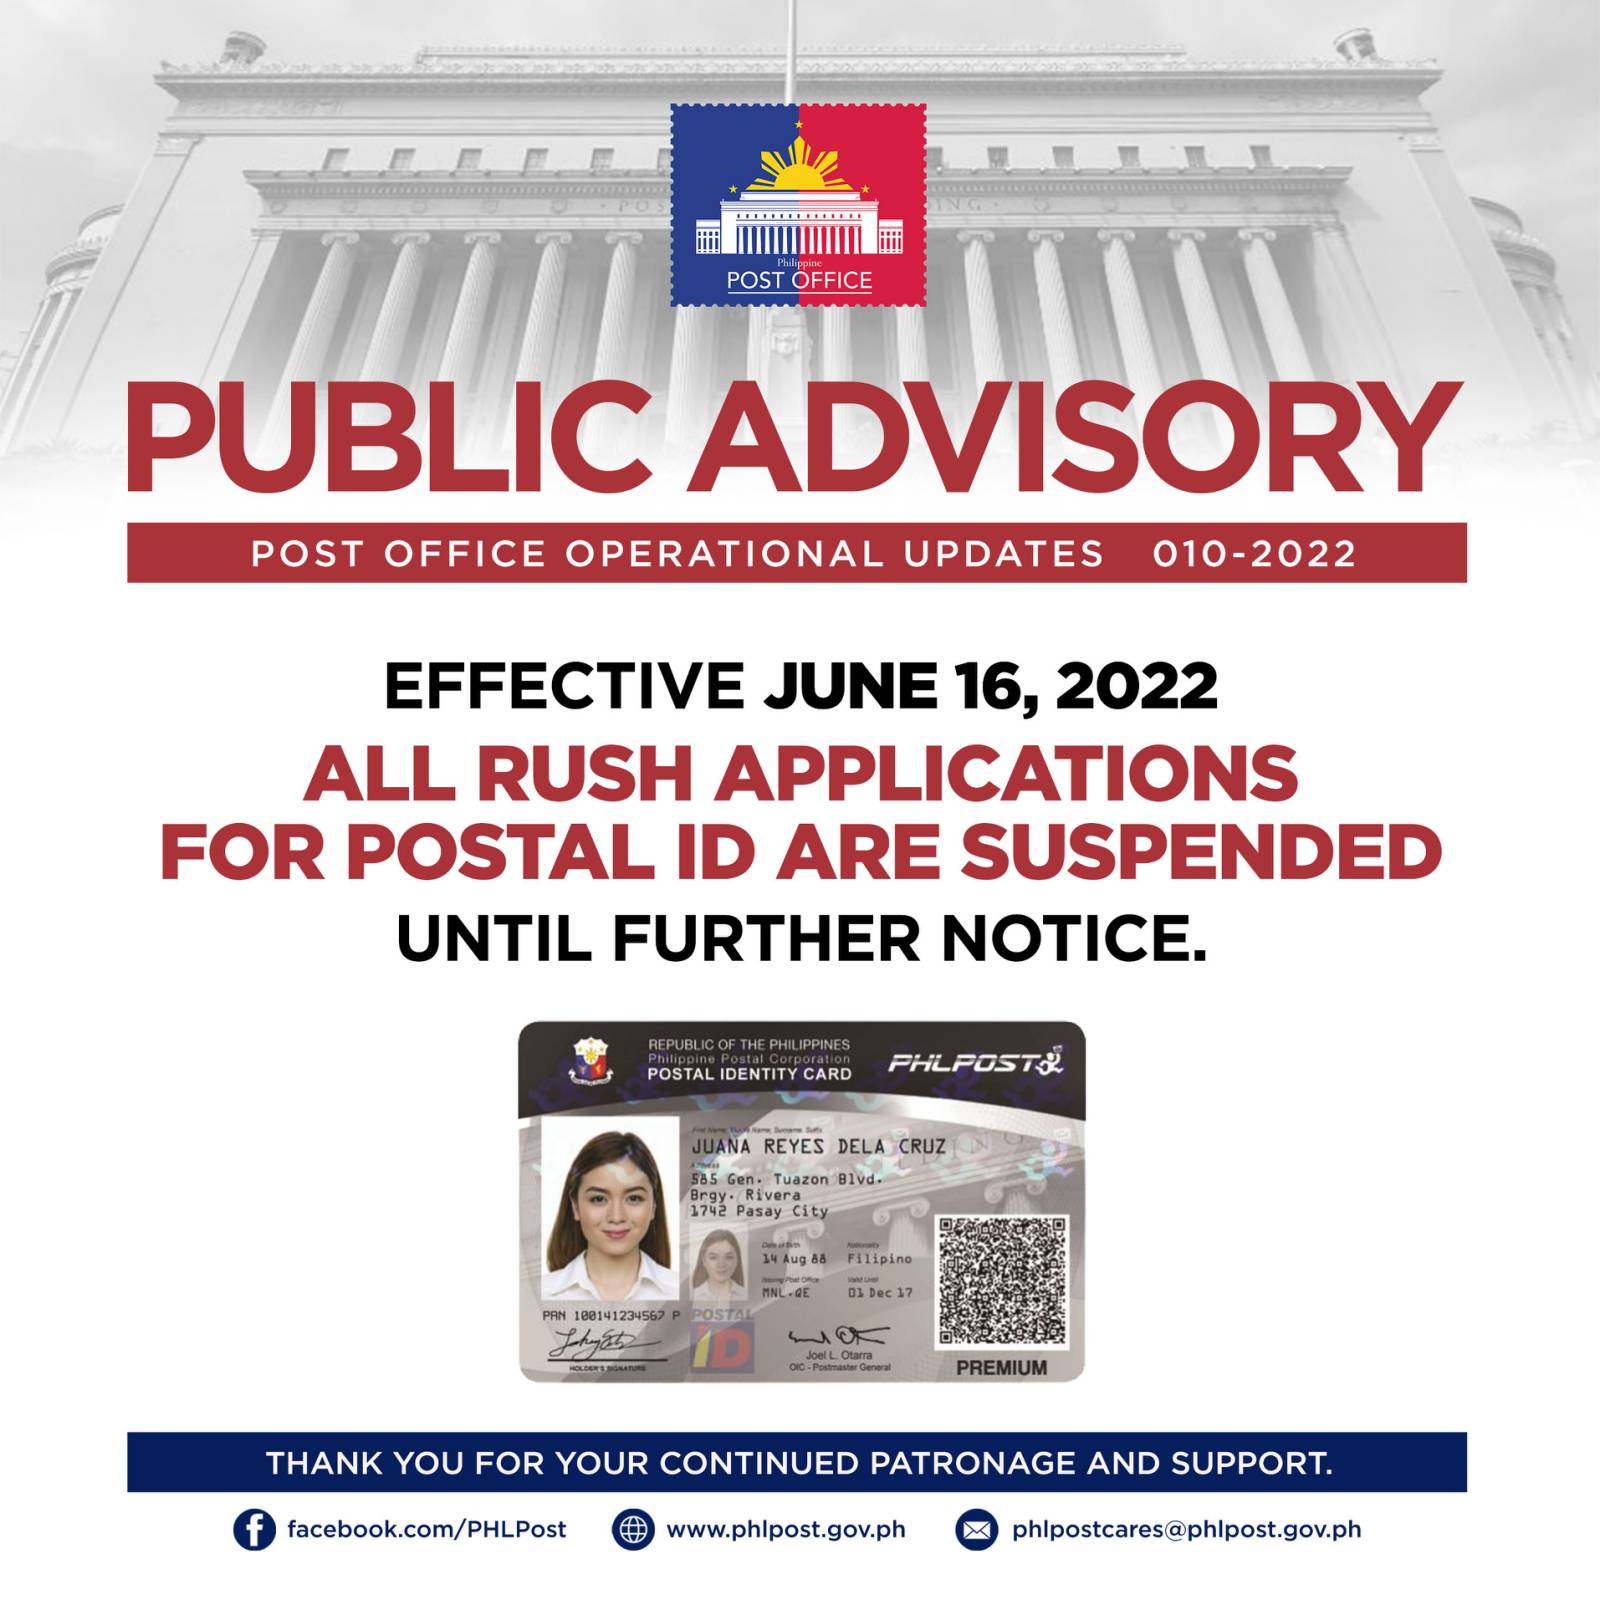 ALL RUSH APPLICATIONS FOR POSTAL ID ARE SUSPENDED